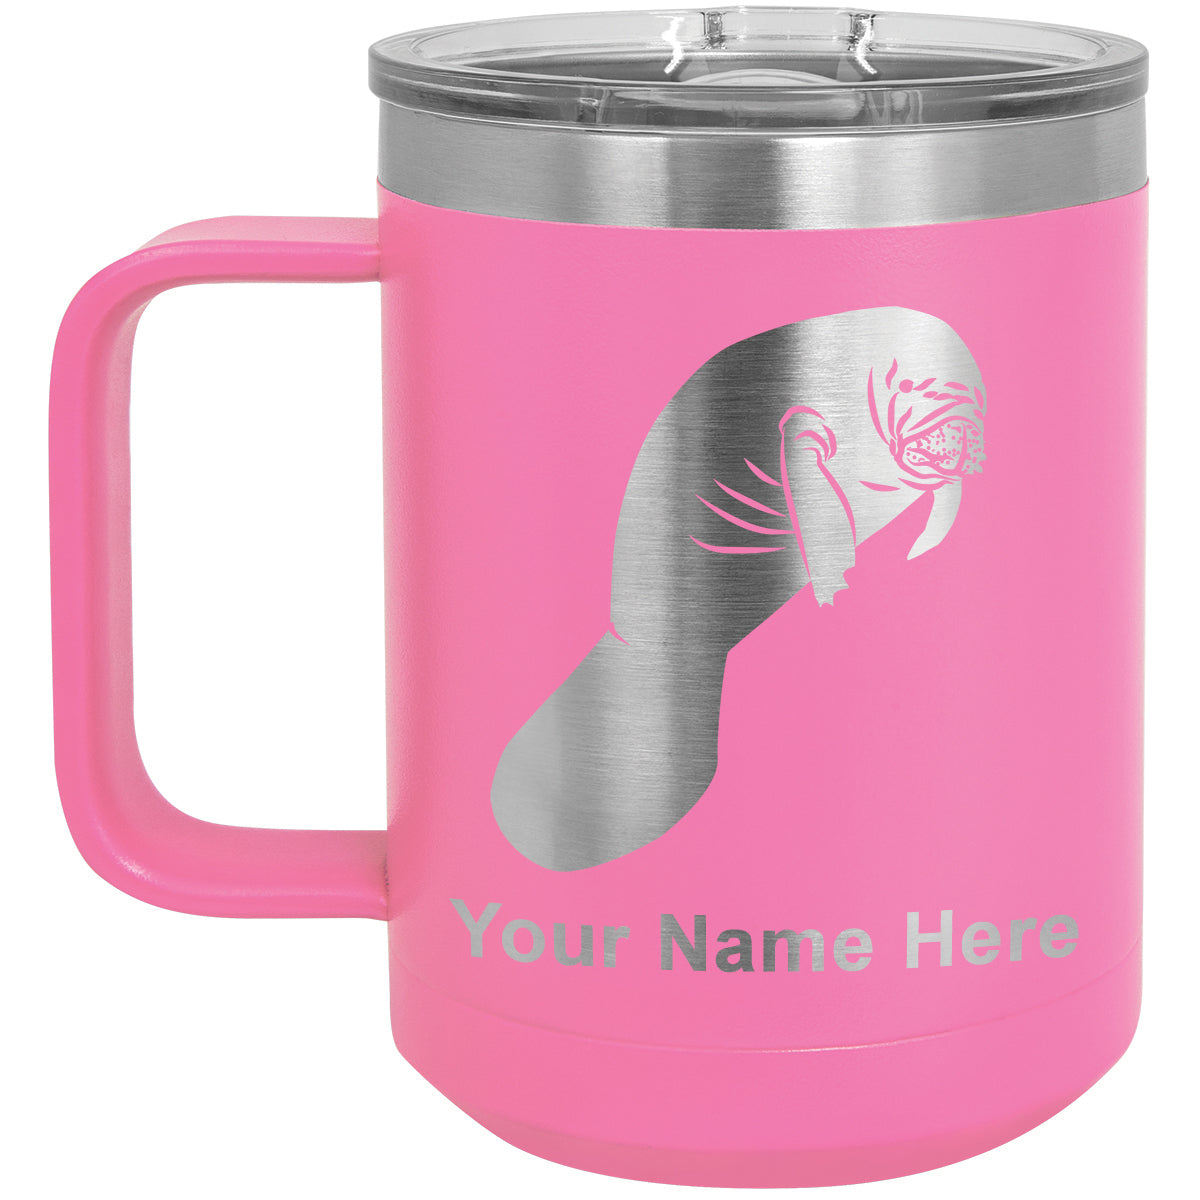 15oz Vacuum Insulated Coffee Mug, Manatee, Personalized Engraving Included